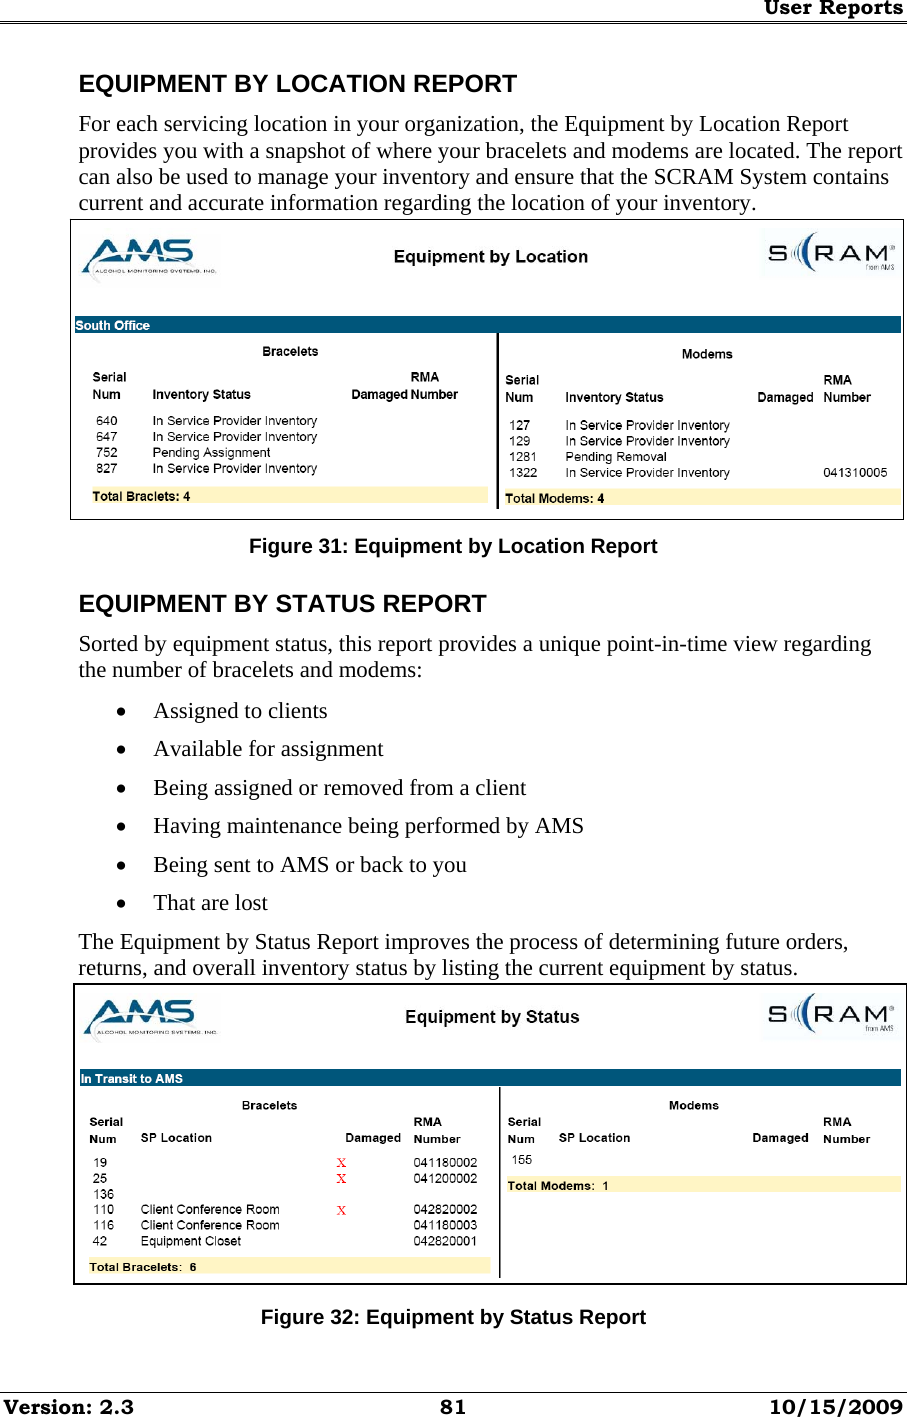 User Reports Version: 2.3  81  10/15/2009 EQUIPMENT BY LOCATION REPORT For each servicing location in your organization, the Equipment by Location Report provides you with a snapshot of where your bracelets and modems are located. The report can also be used to manage your inventory and ensure that the SCRAM System contains current and accurate information regarding the location of your inventory.   Figure 31: Equipment by Location Report EQUIPMENT BY STATUS REPORT Sorted by equipment status, this report provides a unique point-in-time view regarding the number of bracelets and modems: • Assigned to clients • Available for assignment • Being assigned or removed from a client • Having maintenance being performed by AMS • Being sent to AMS or back to you • That are lost The Equipment by Status Report improves the process of determining future orders, returns, and overall inventory status by listing the current equipment by status.   Figure 32: Equipment by Status Report 